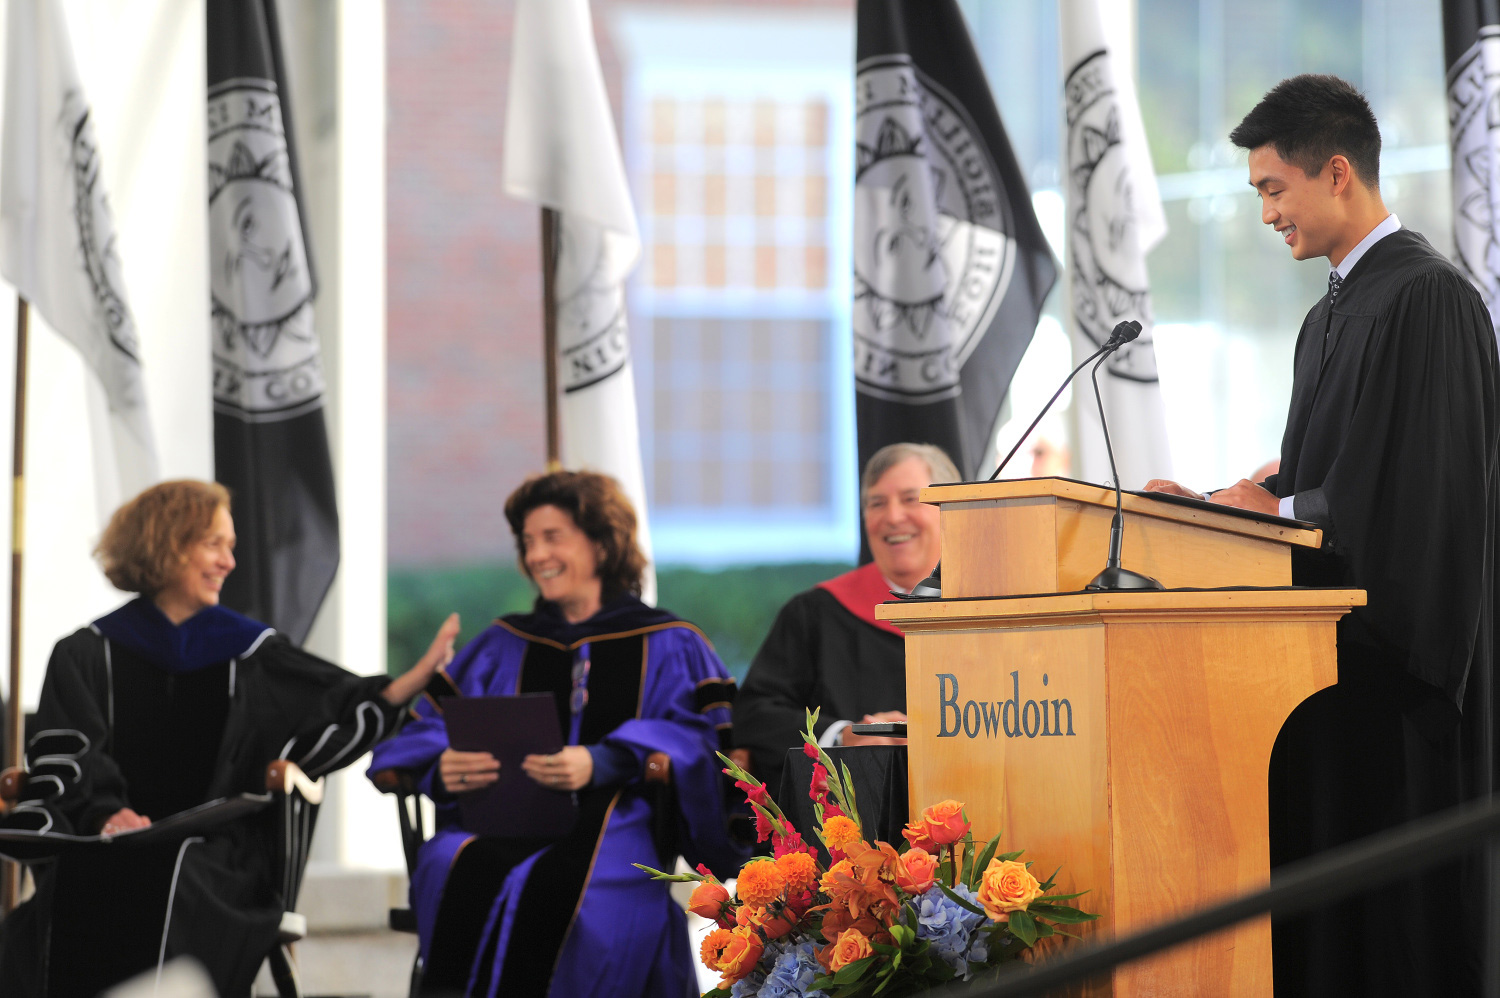 Bowdoin senior Paul Wang '24 delivers remarks on behalf of the student body.